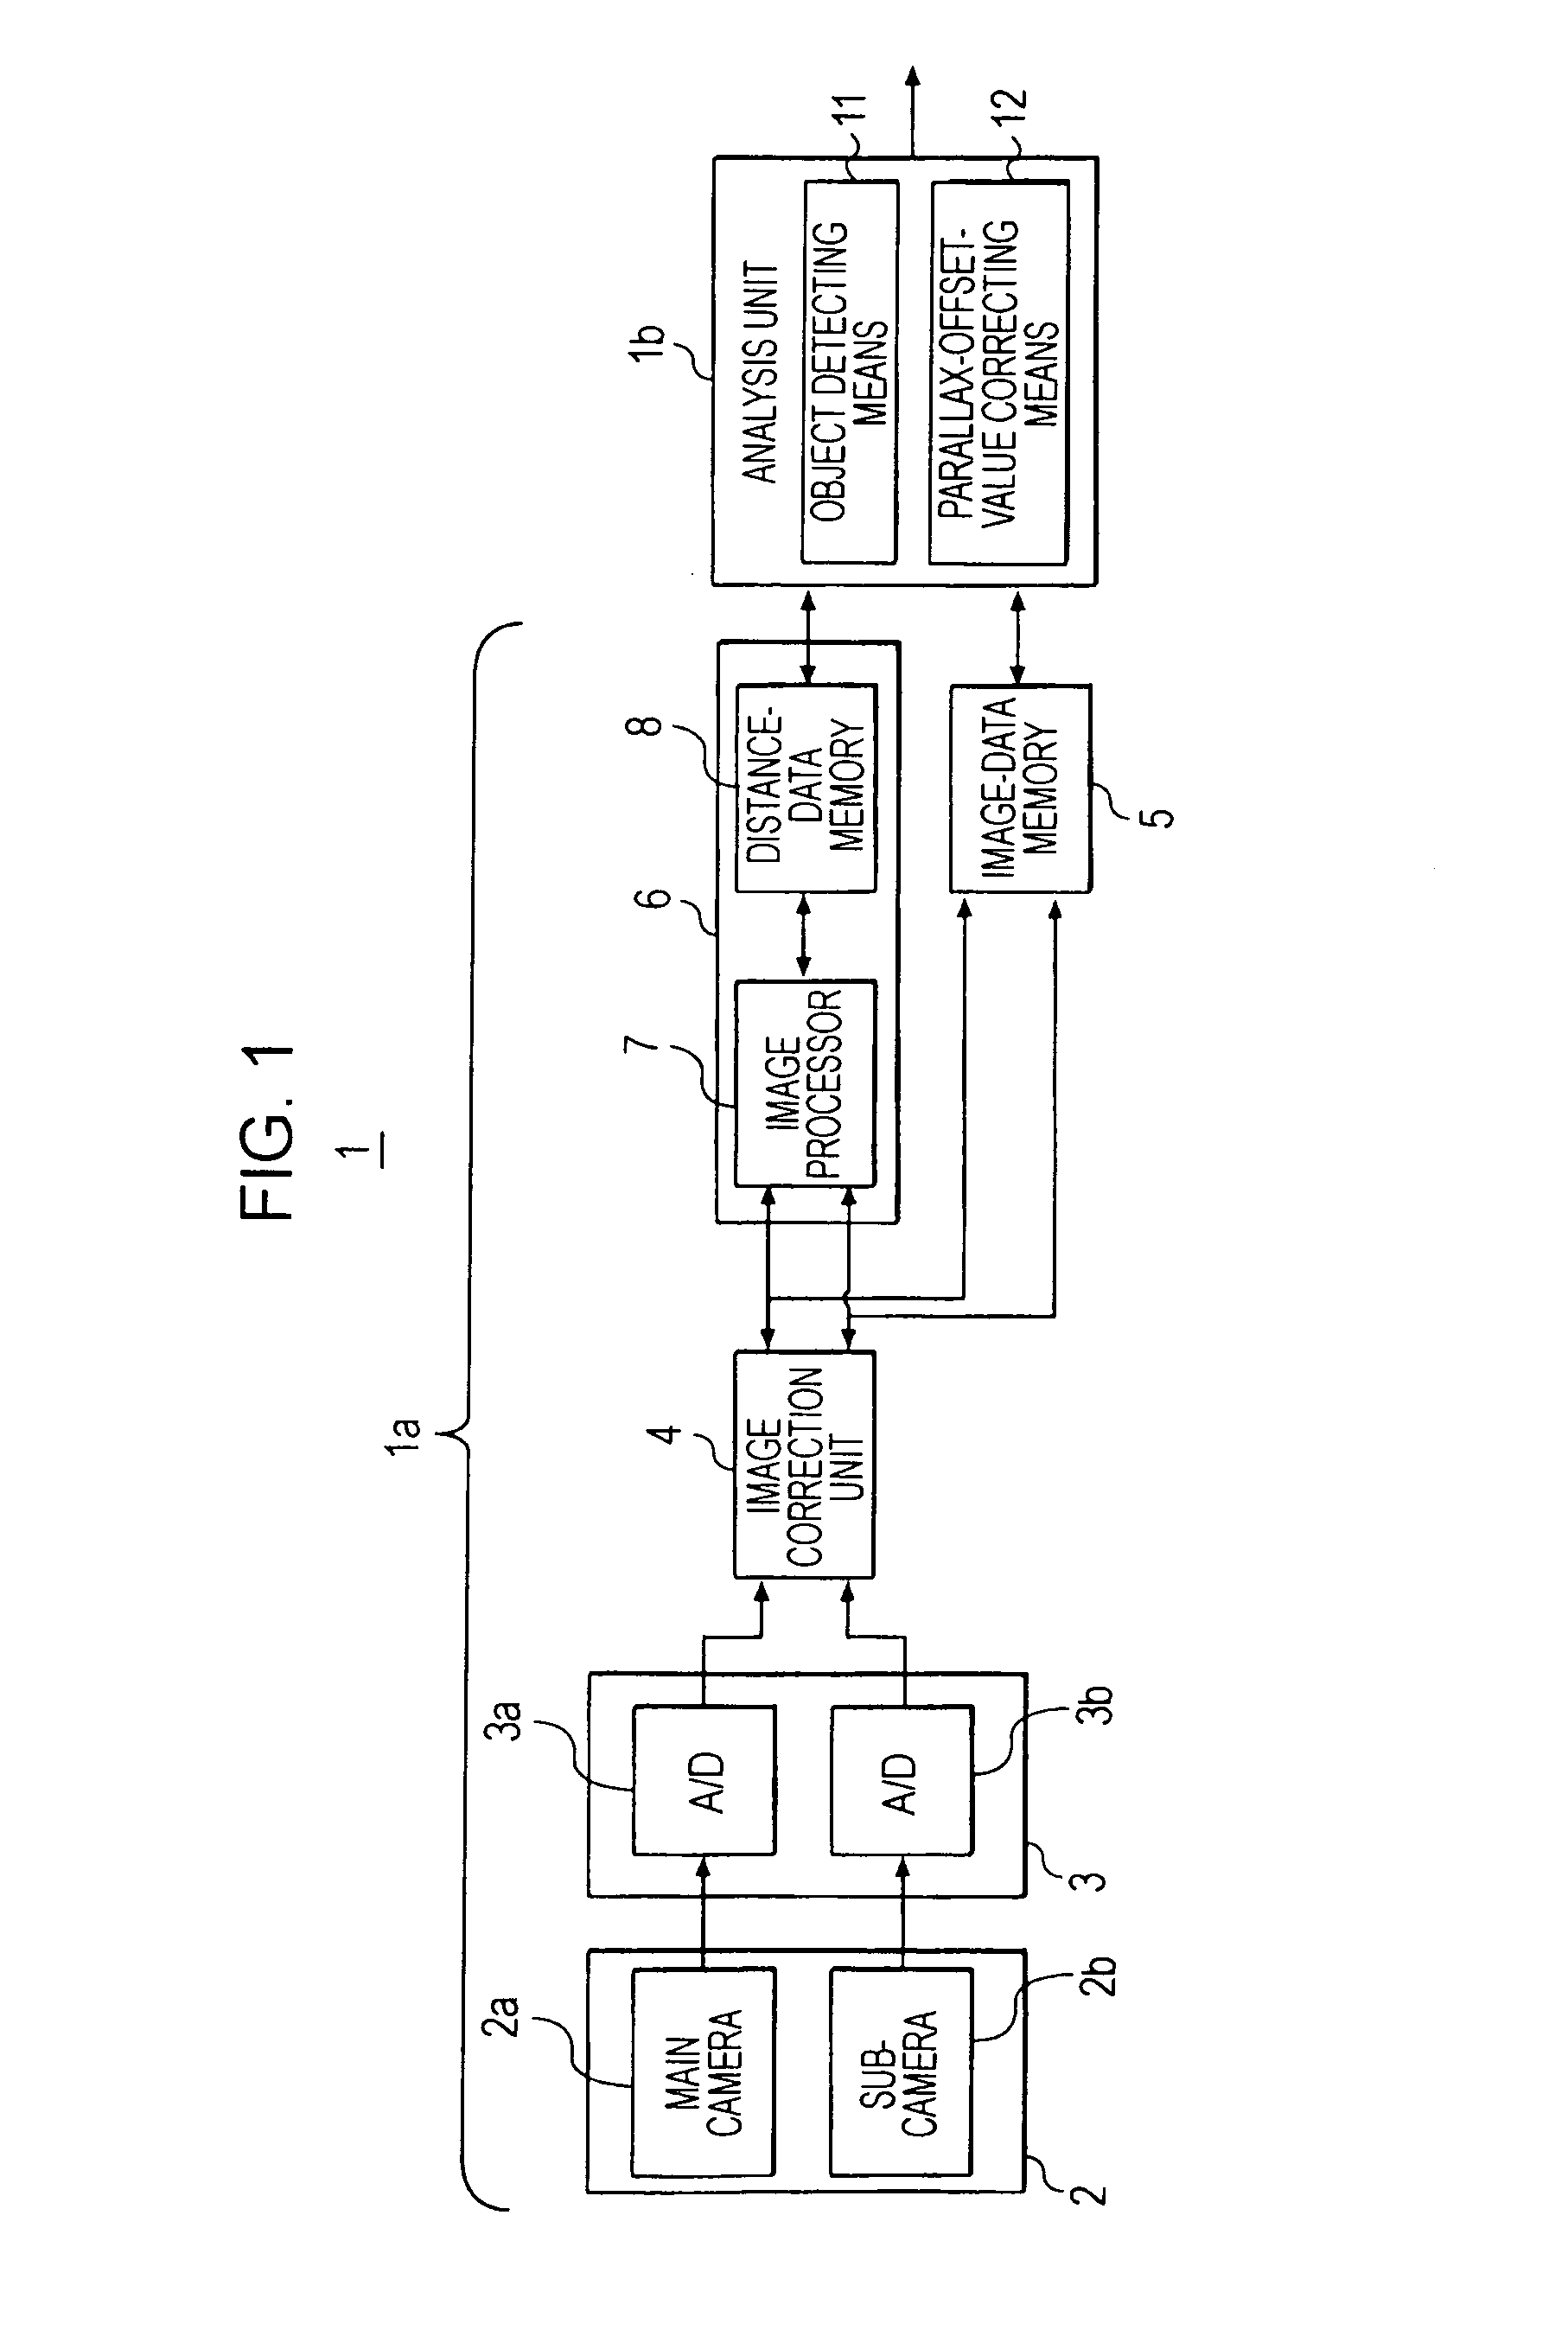 Stereo-image processing apparatus